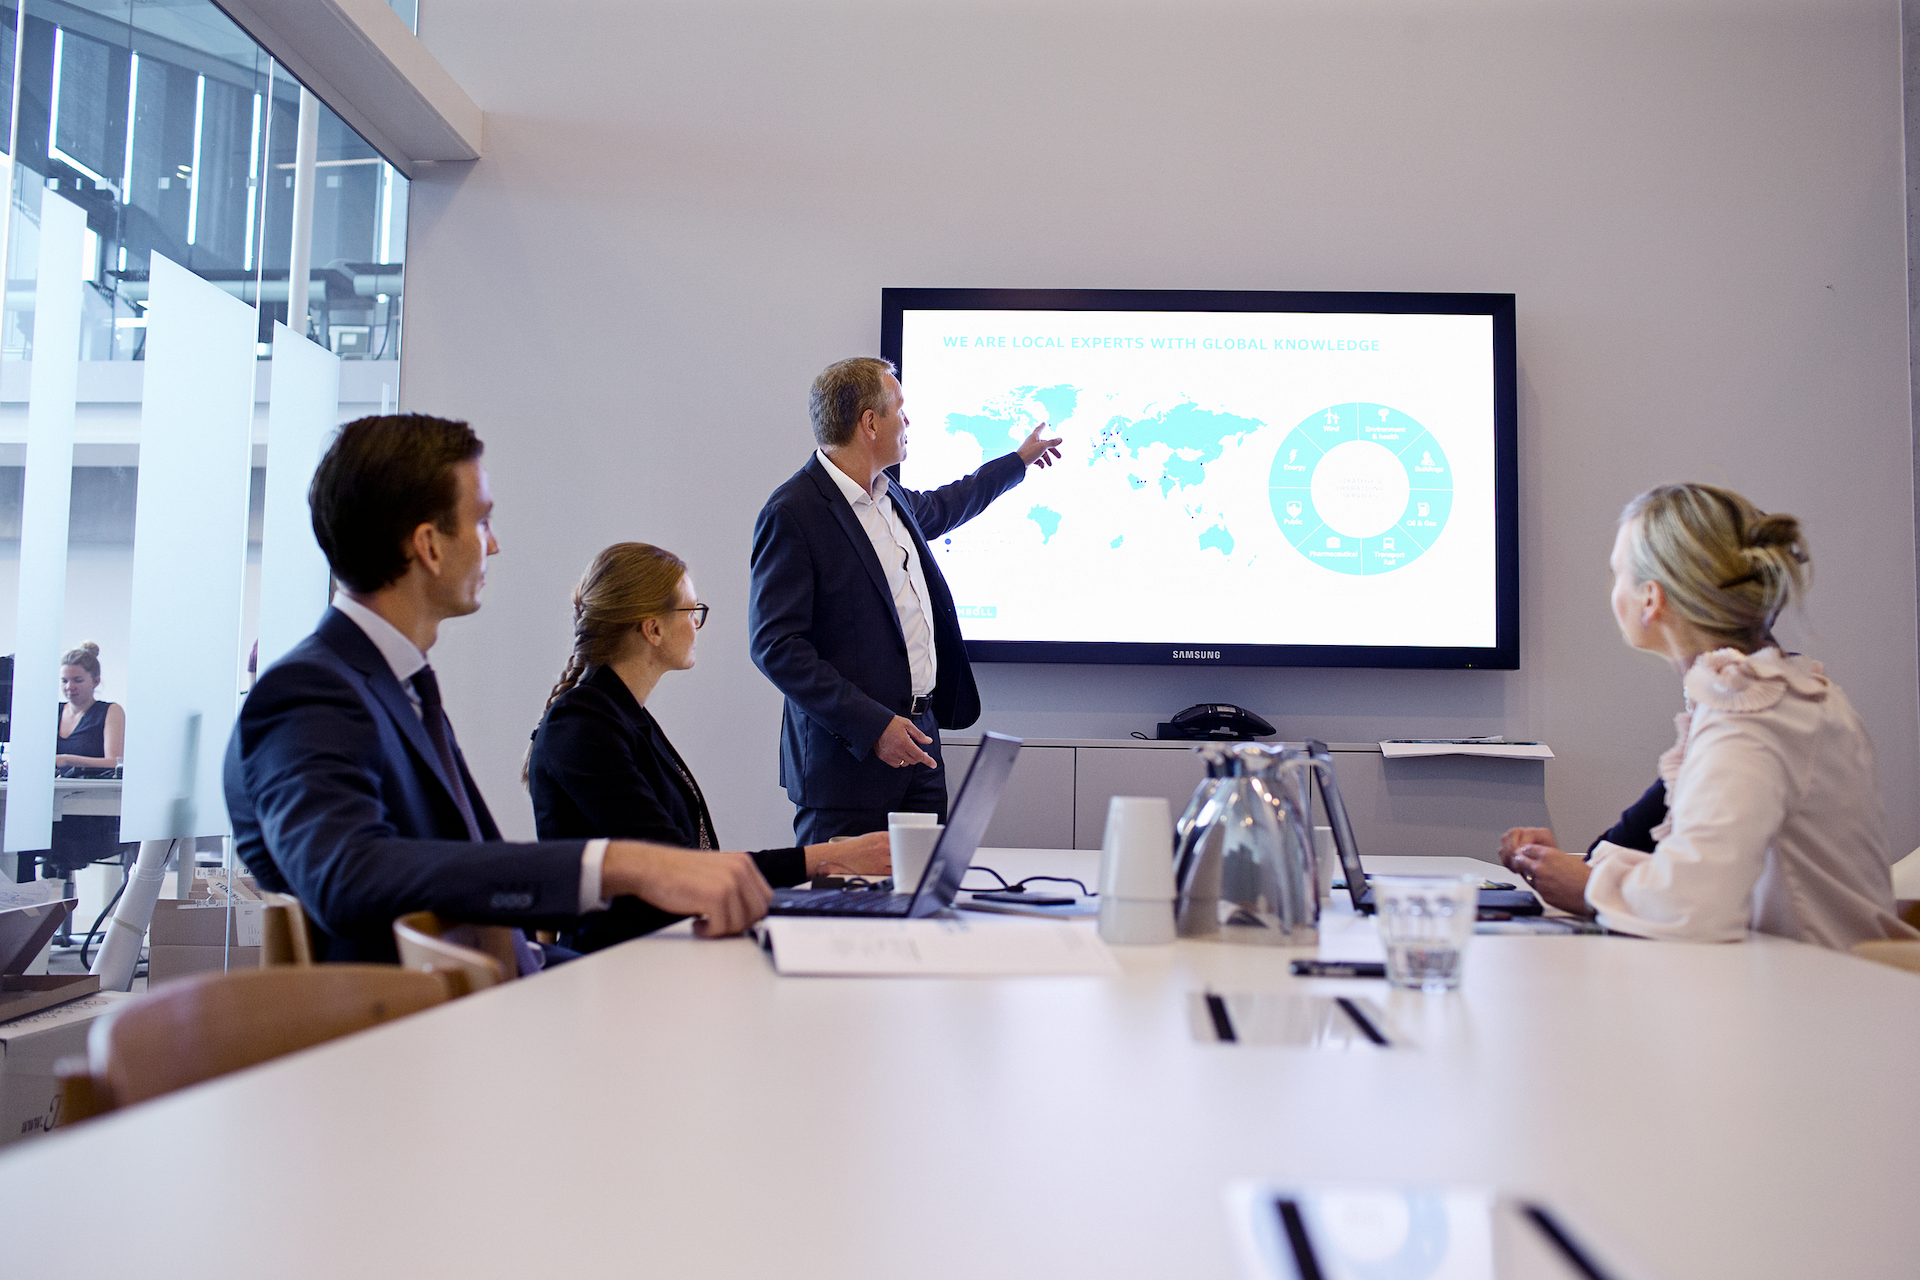 Ramboll employees in a meeting with a presenter